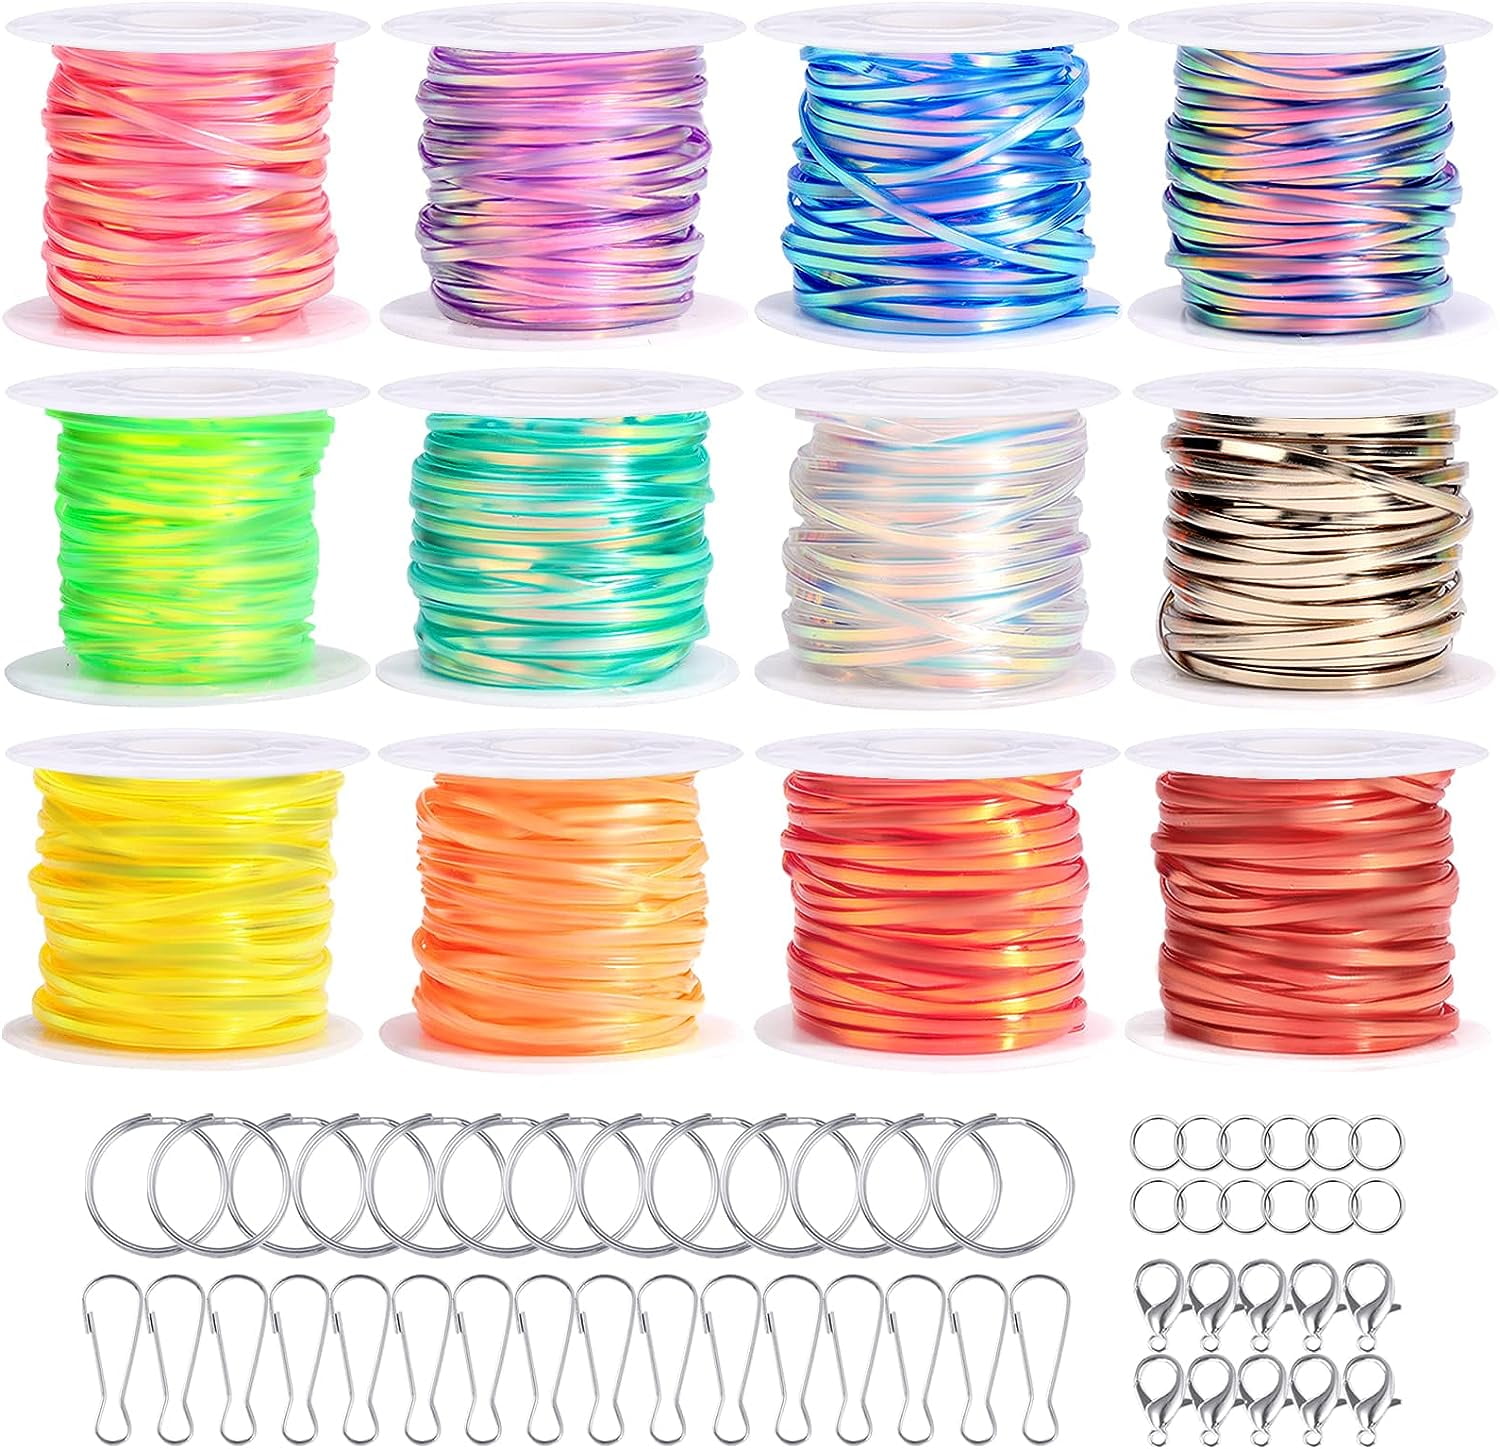 Xinyi Plastic Lanyard String, 20 Rolls Boondoggle String with Instruction for Beginners and 220 Beads, Gimp Bracelet Making Kit for DIY Bracelets, Key